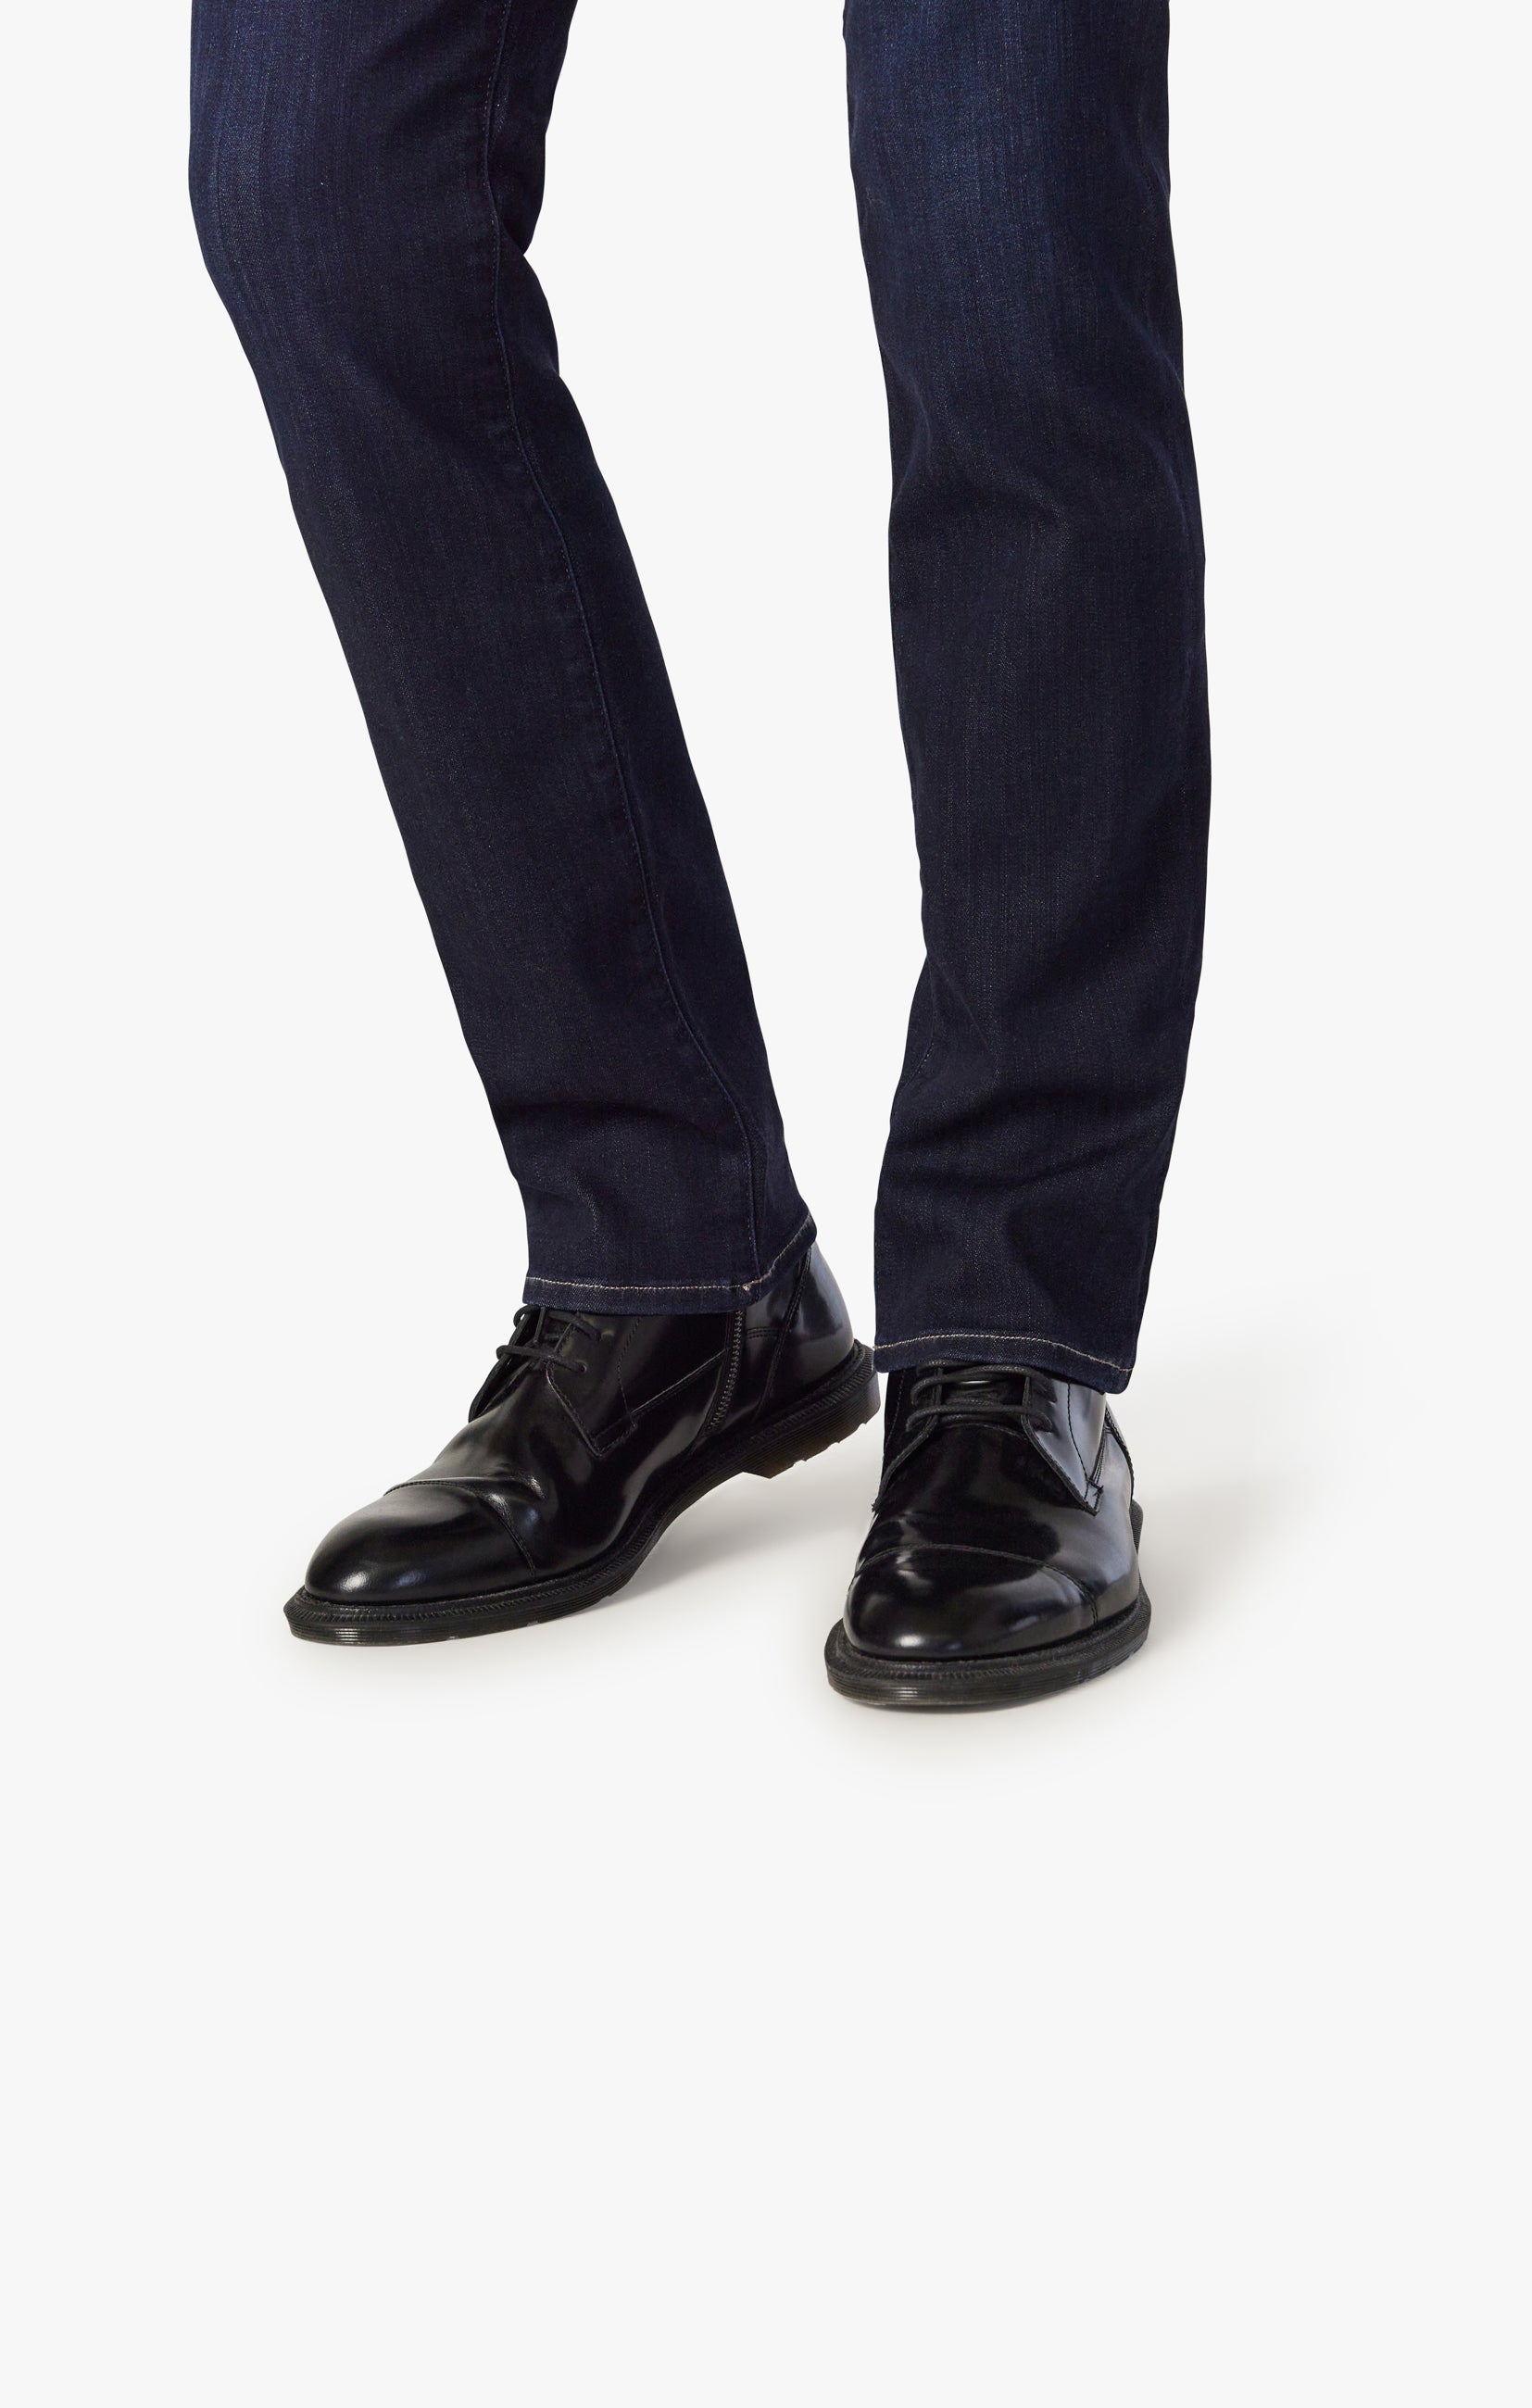 Courage Straight Leg Jeans In Deep Refined Image 7